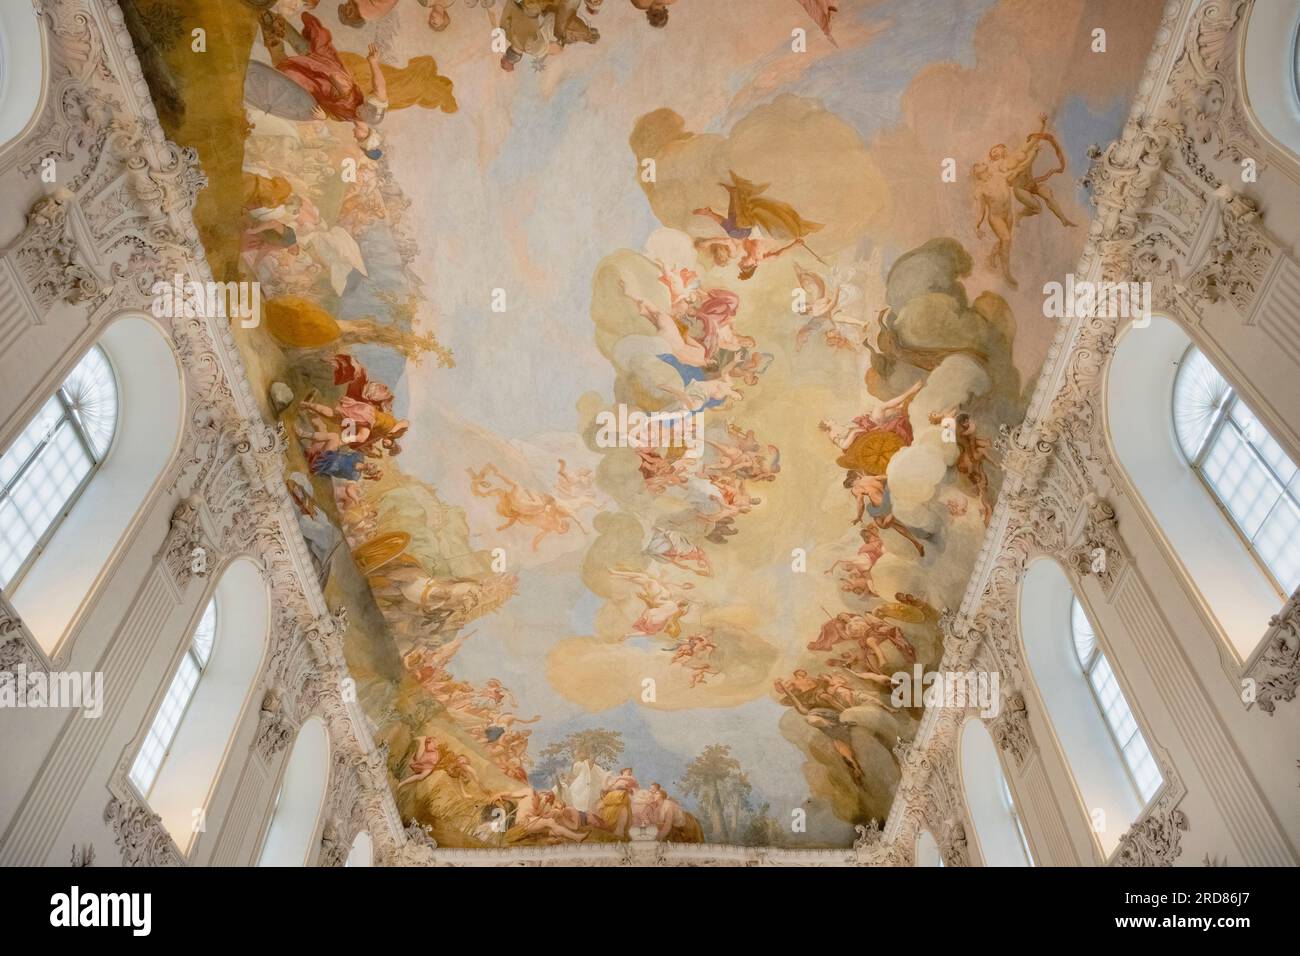 Germany, Bavaria,  Munich, Schleissheim Palace, The Neues Schloss or New Castle, the Large Hall, ceiling painting by the Venetian Jacopo Amigoni. Stock Photo